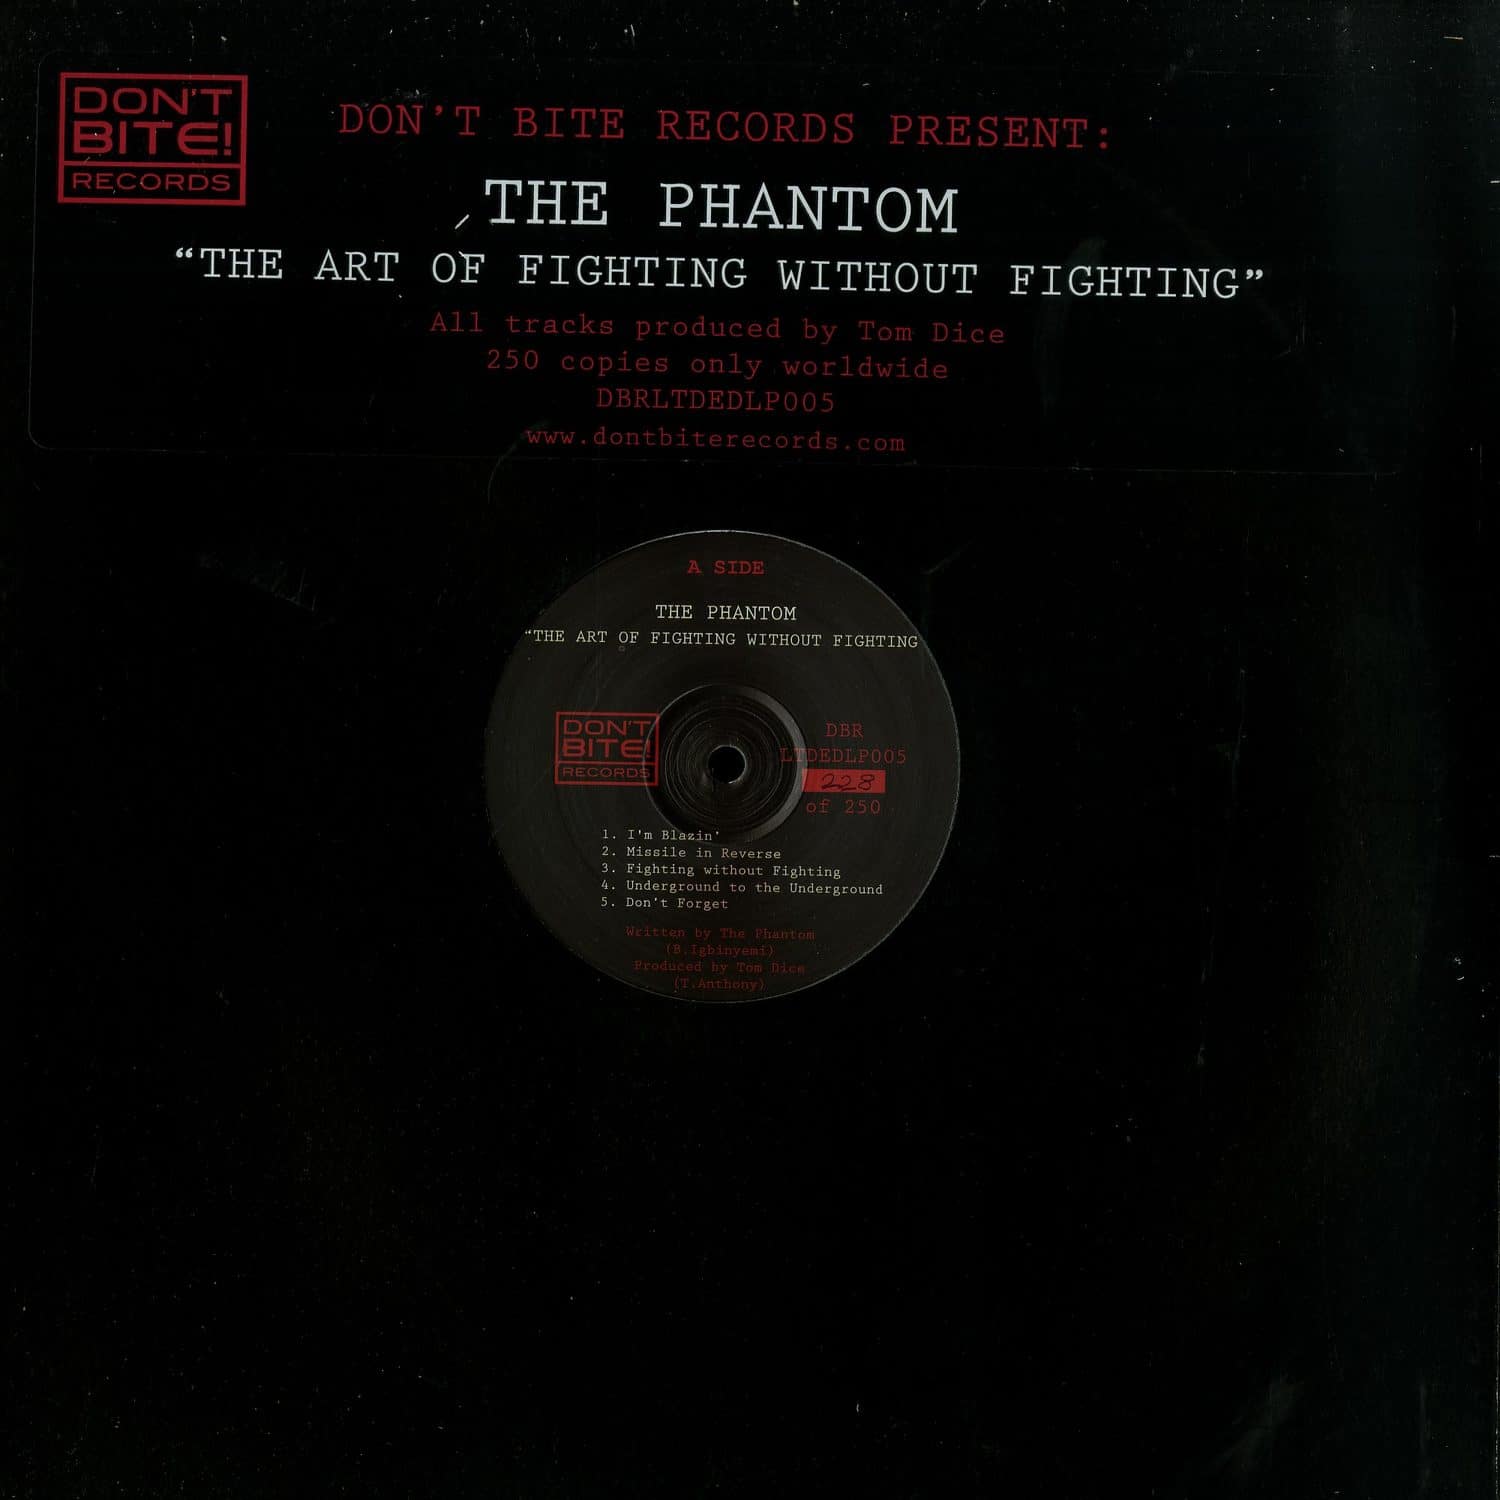 The Phantom - THE ART OF FIGHTING WITHOUT FIGHTING 